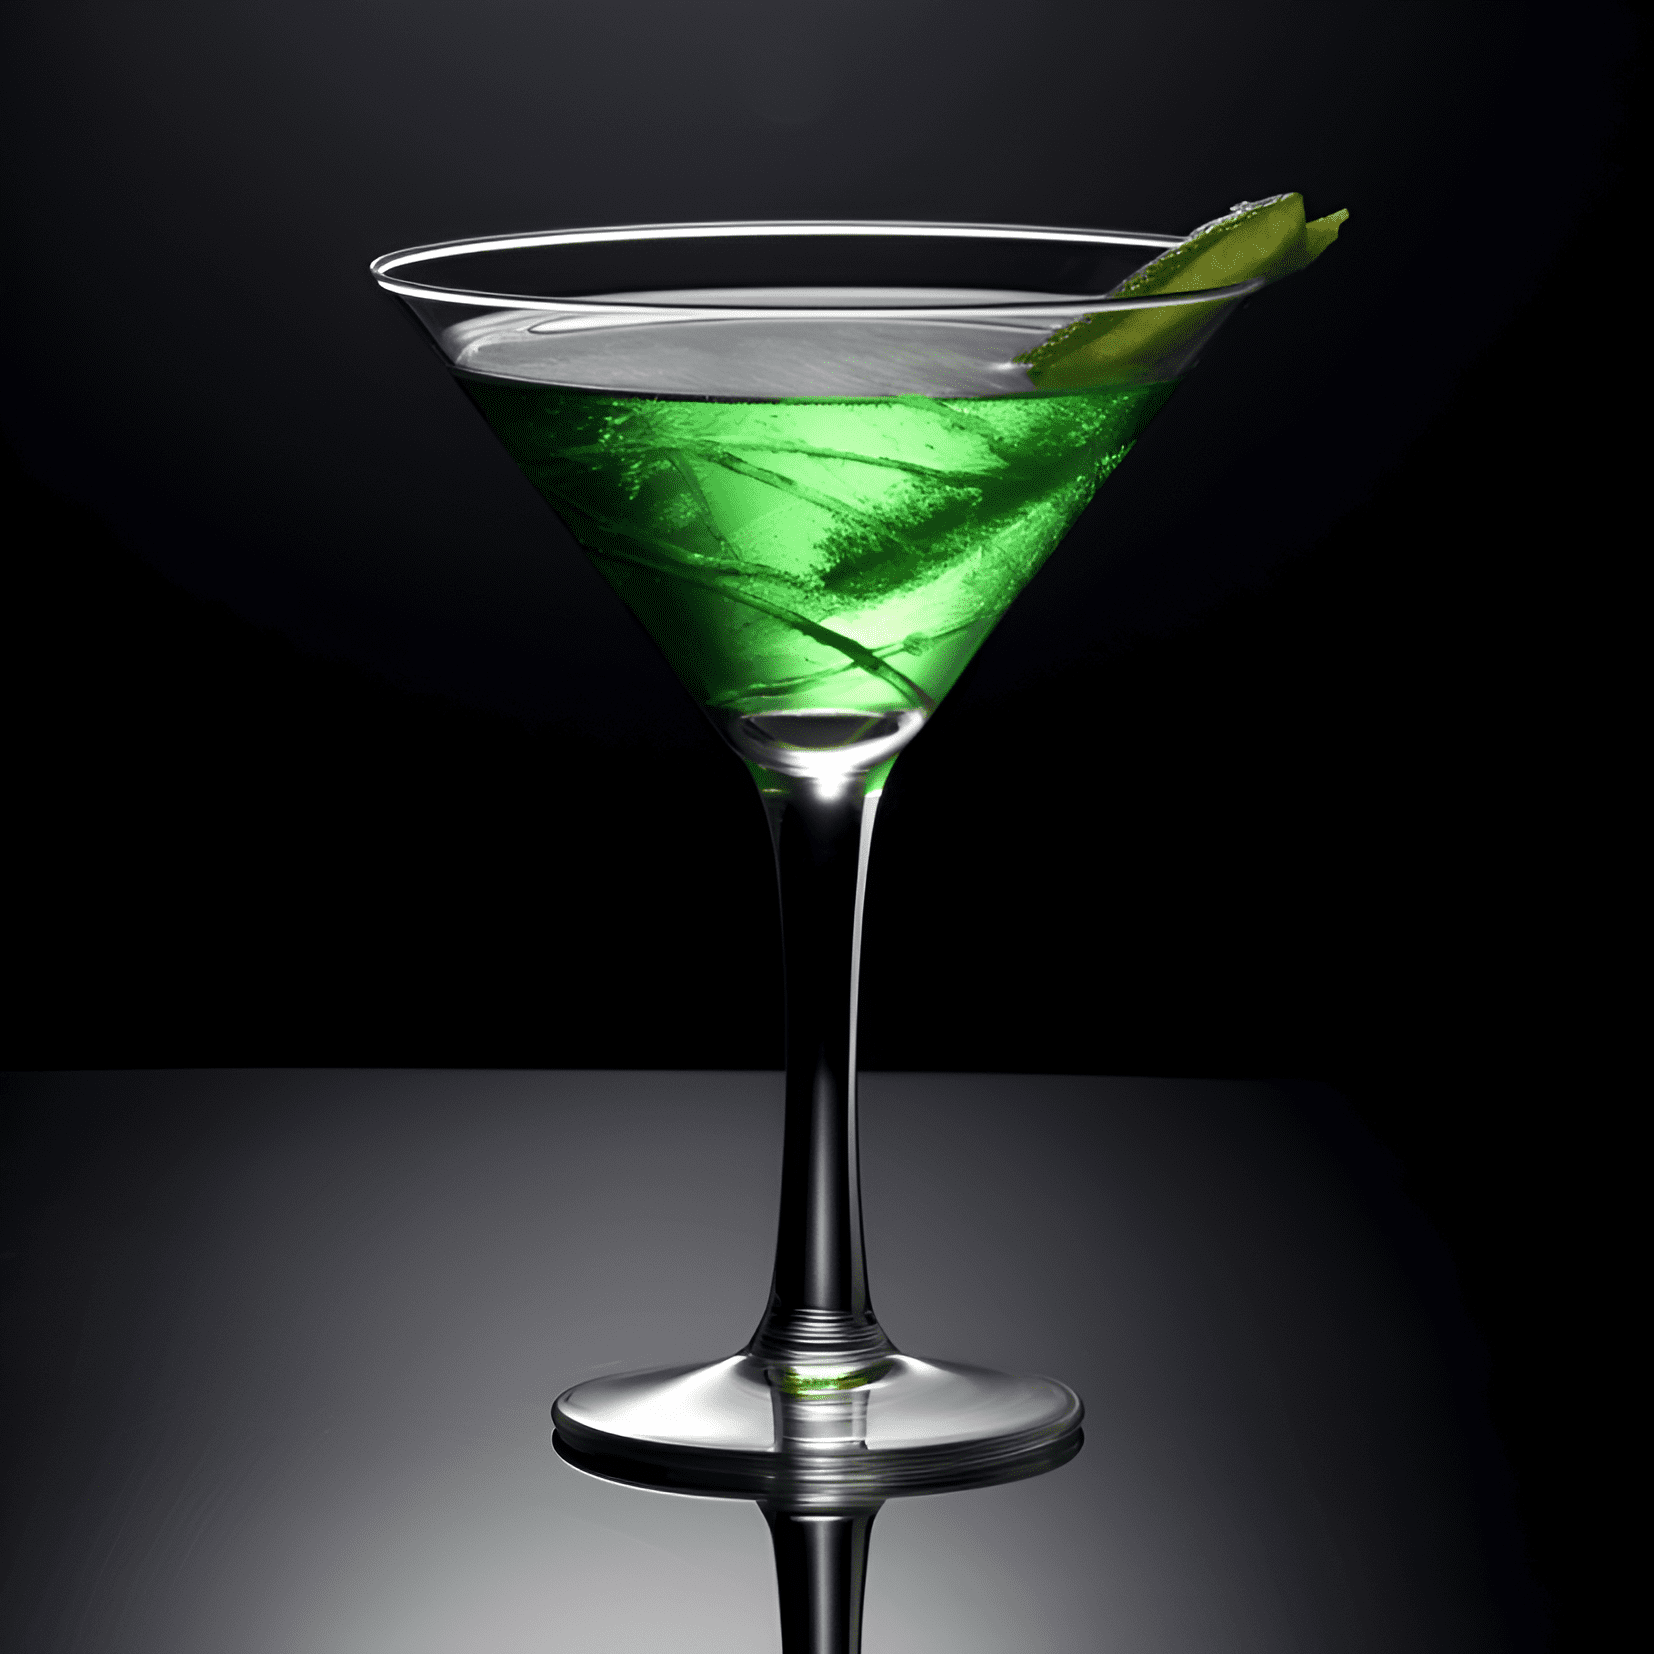 The Japanese Slipper is a sweet and tangy cocktail with a fruity and refreshing taste. It has a smooth and velvety texture, with a hint of sourness from the lemon juice and a subtle sweetness from the Midori and Cointreau.